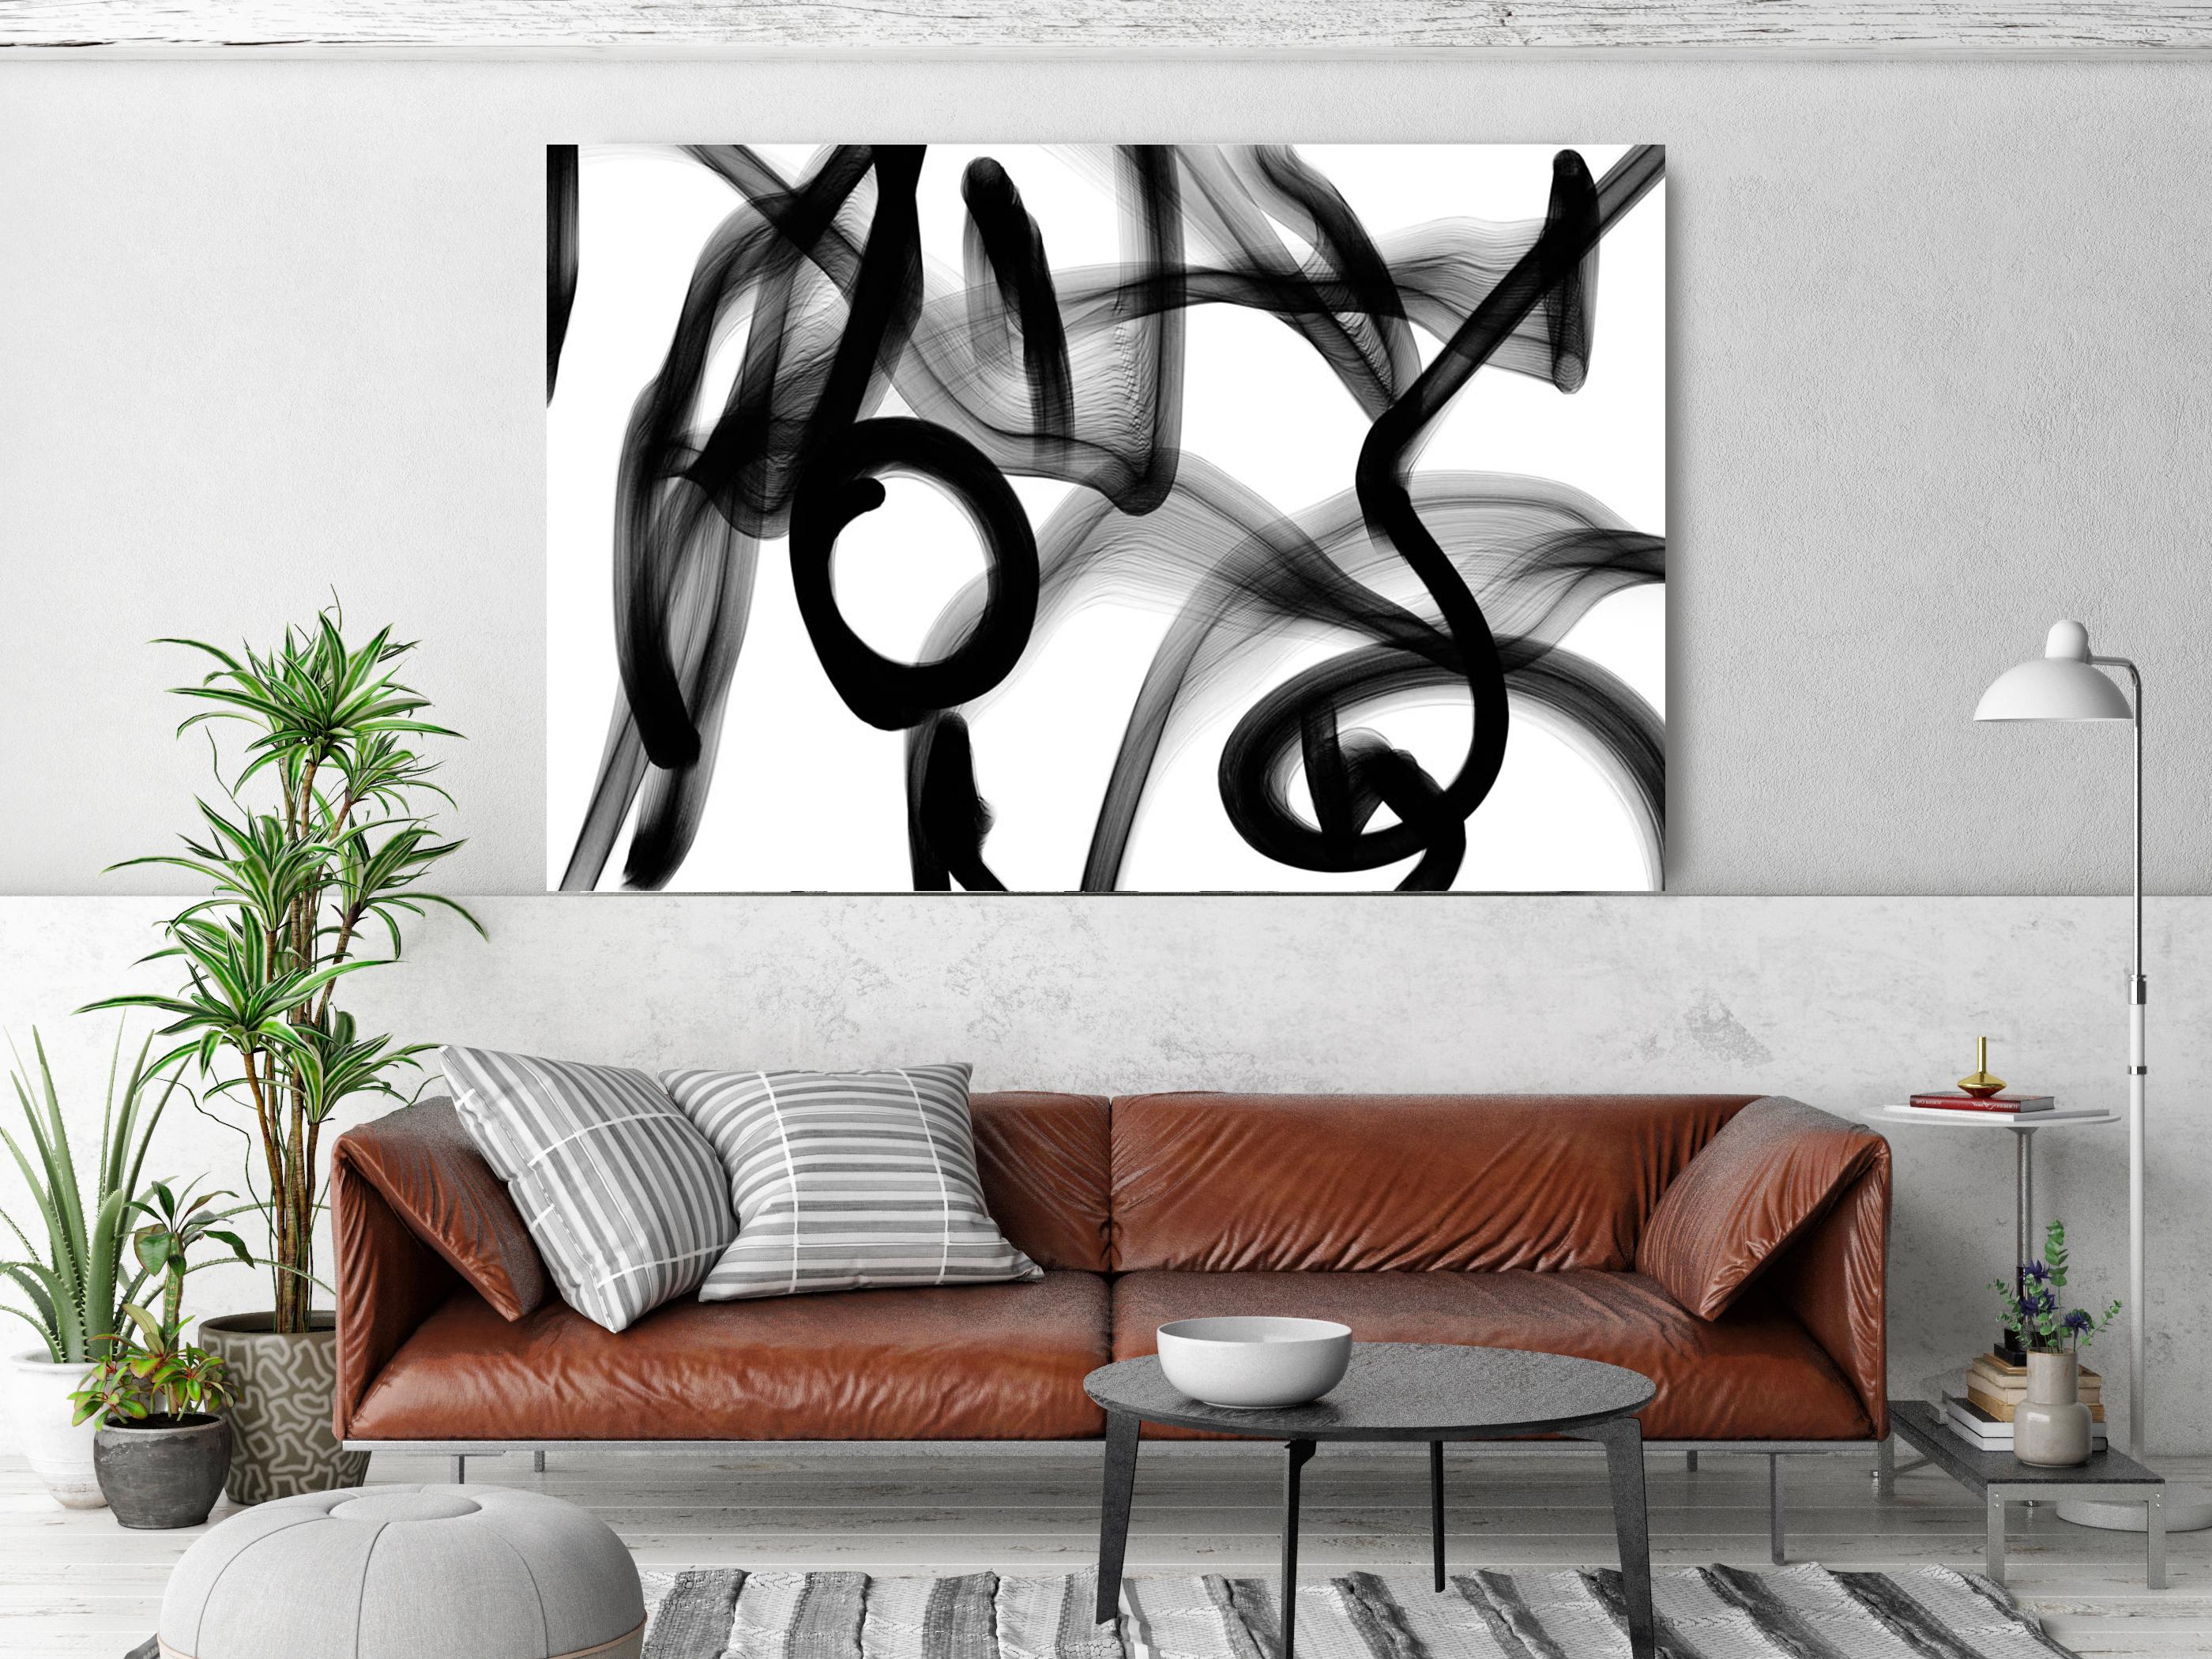 Black White Minimalist New Media Painting on Canvas 60x45"Everything and nothing